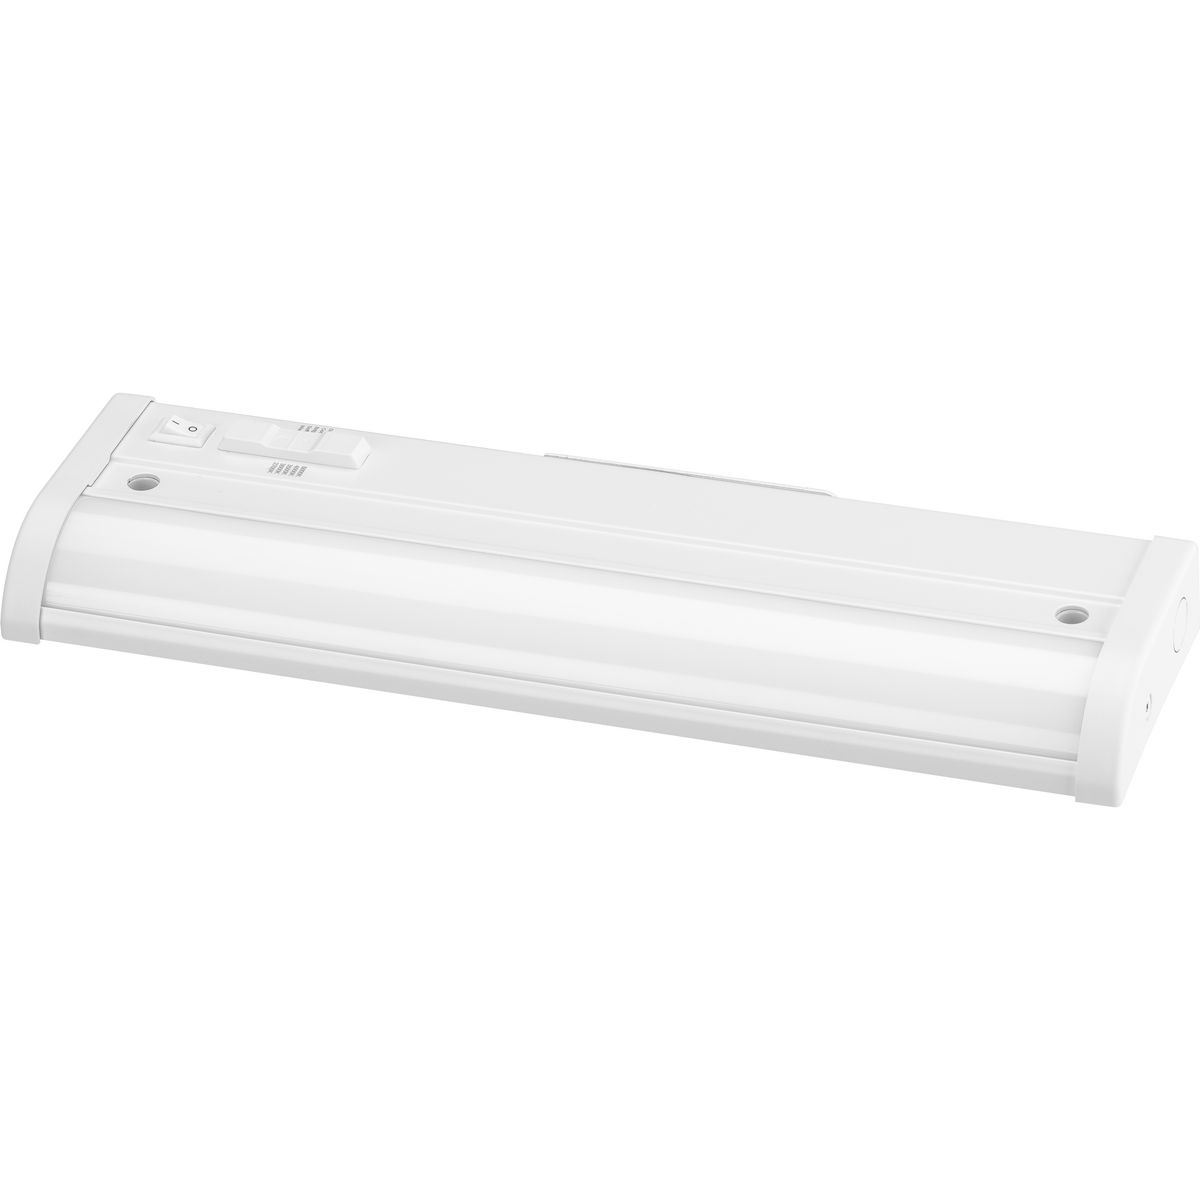 P700025-028-CS 12IN UC LINEAR LED